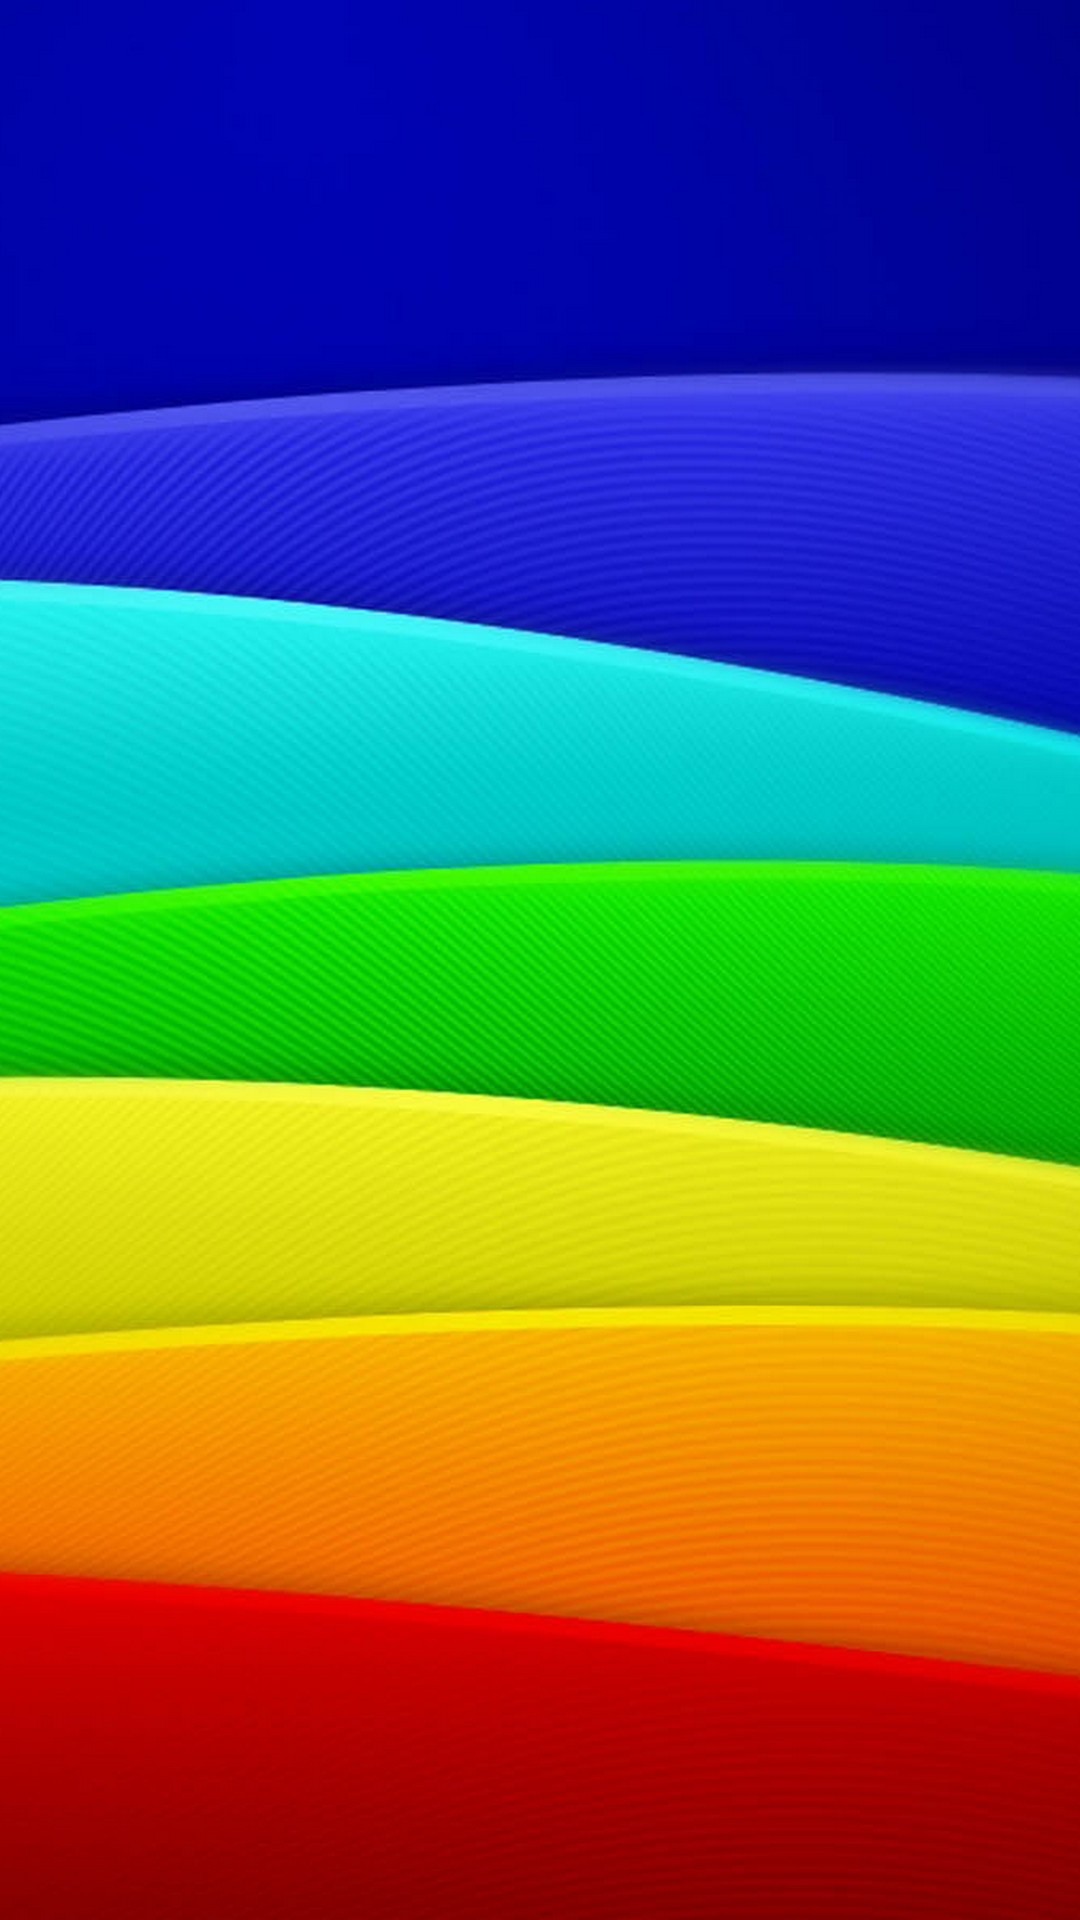 Rainbow Backgrounds For Android with resolution 1080X1920 pixel. You can make this wallpaper for your Android backgrounds, Tablet, Smartphones Screensavers and Mobile Phone Lock Screen